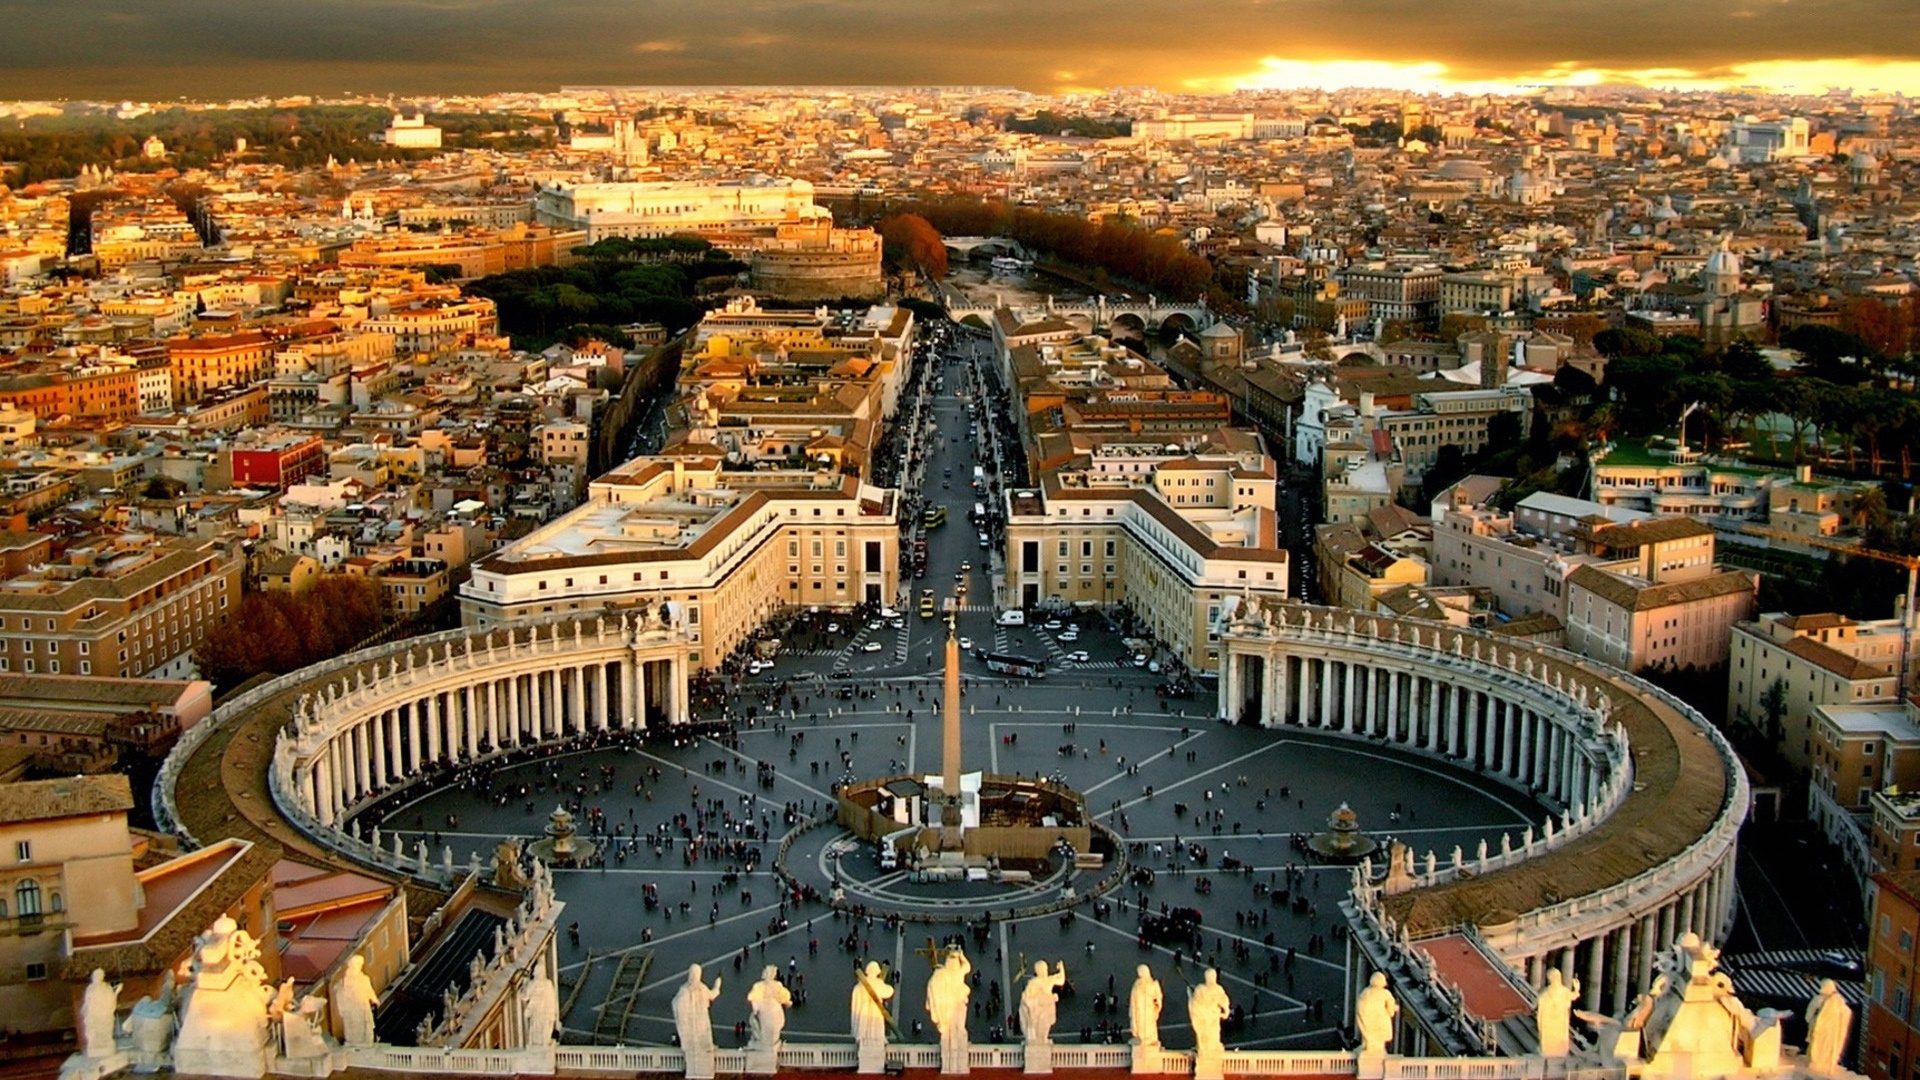 A spectacular view of St. Peter's Square from above